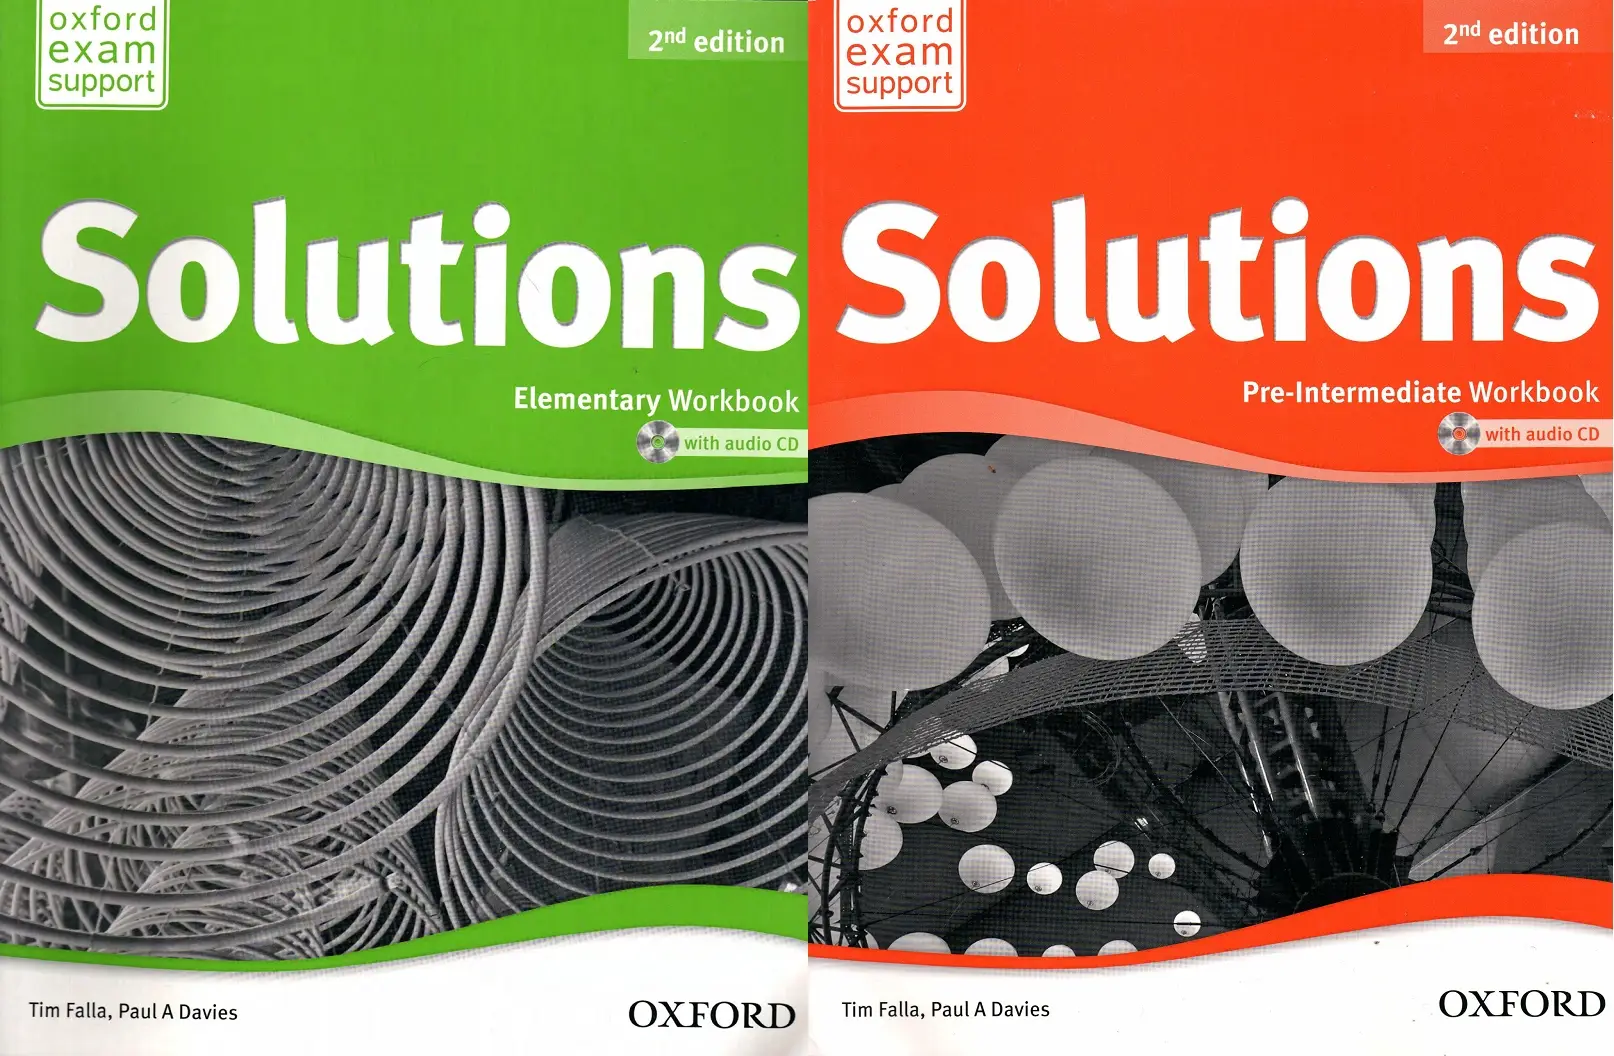 Solutions elementary pdf. Oxford solutions 2nd Edition Elementary Workbook. Solutions pre-Intermediate student's book пдф. Solutions Elementary Workbook 3 уровень. Оксфорд solutions Elementary.